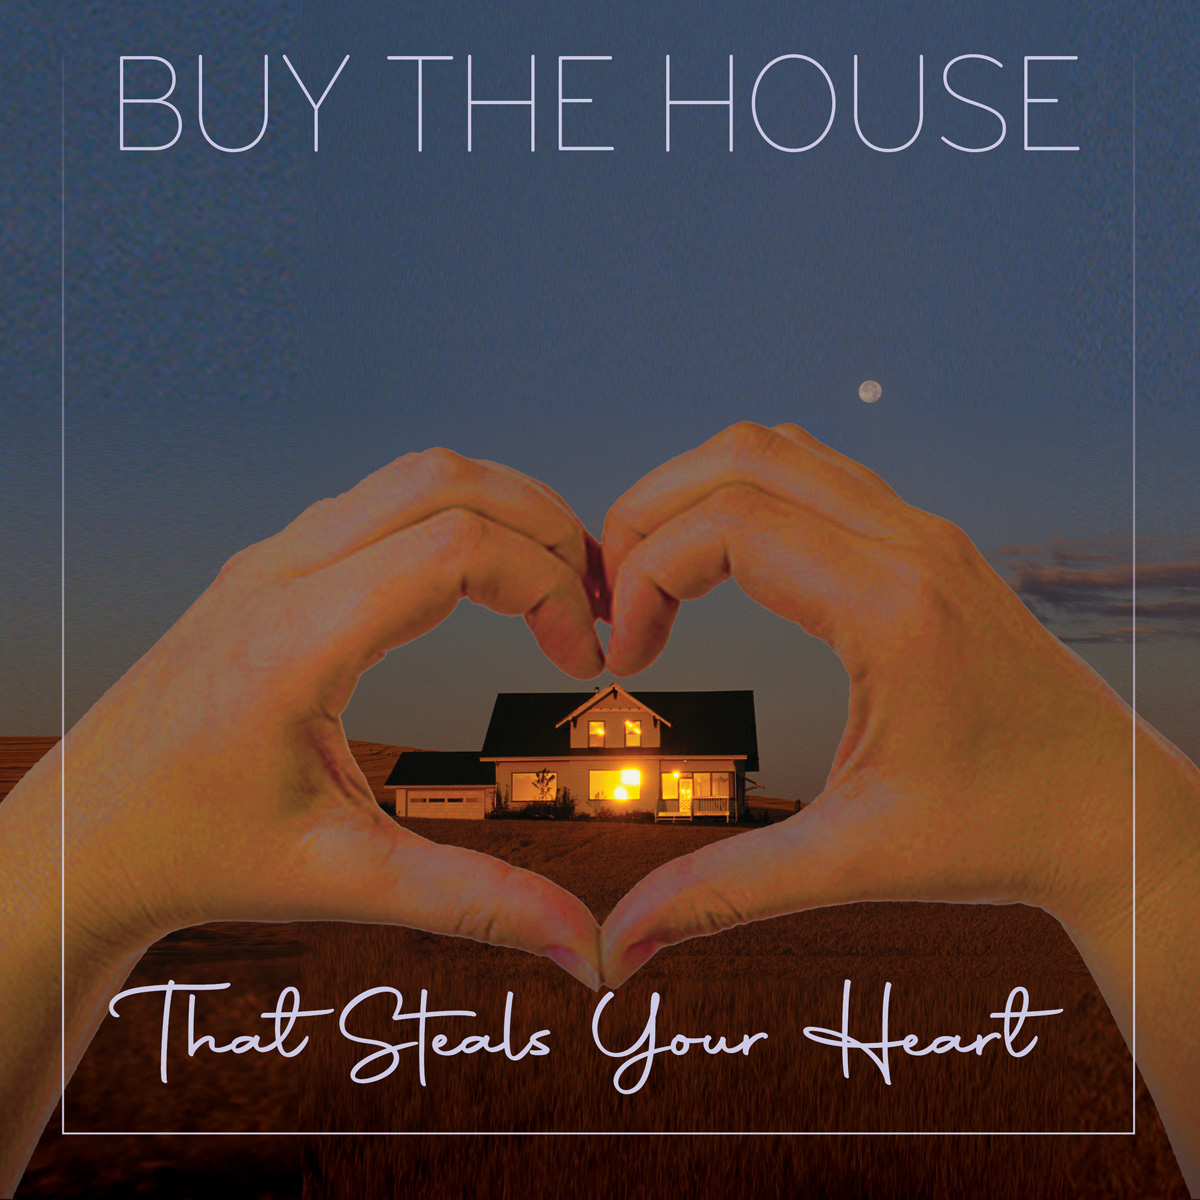 They say home is where the heart is, and we couldn't agree more. Let us help you find the mortgage that meets your needs, for the house that steals your heart. Contact us!
skmmortgage.com #skmmortgage #firsttimehomebuyer